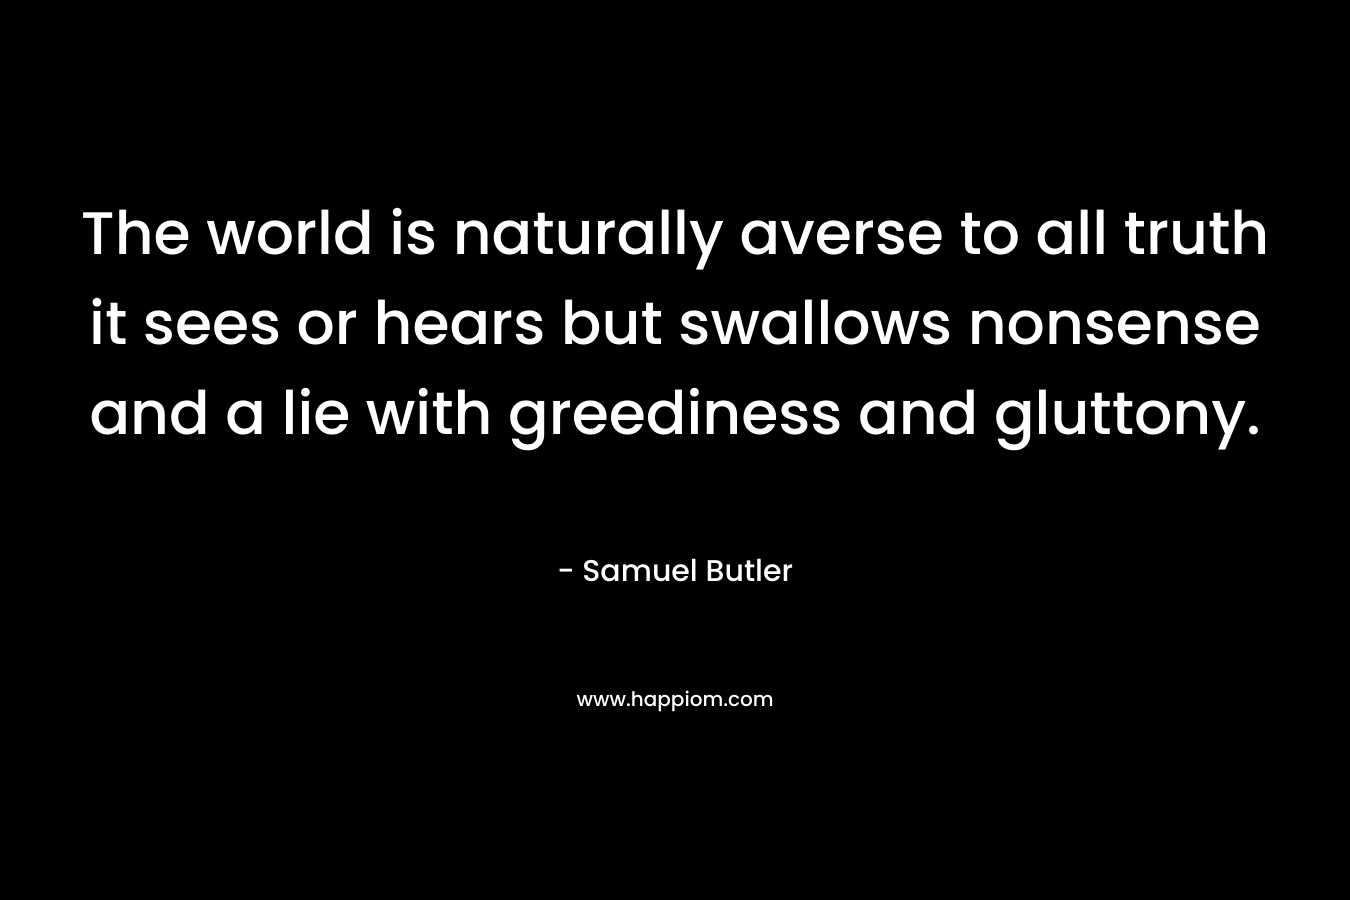 The world is naturally averse to all truth it sees or hears but swallows nonsense and a lie with greediness and gluttony. – Samuel Butler